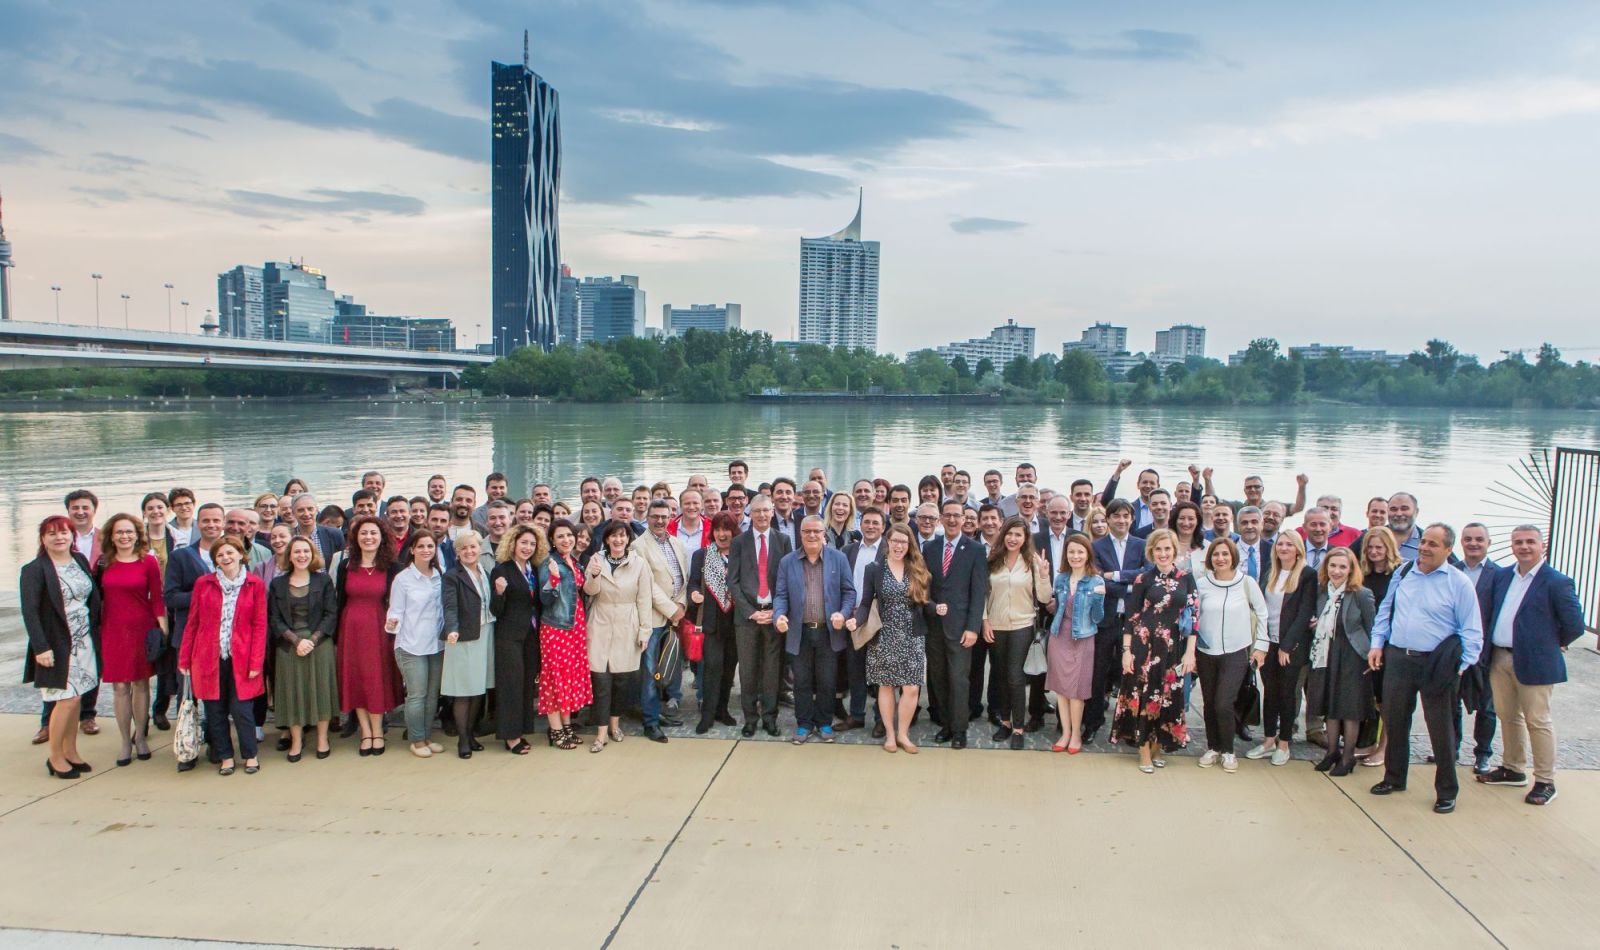 Regional cooperation as a key to accelerate SDG 6 implementation – The Danube Water Program as lighthouse example to improve water and sanitation services within the Danube region